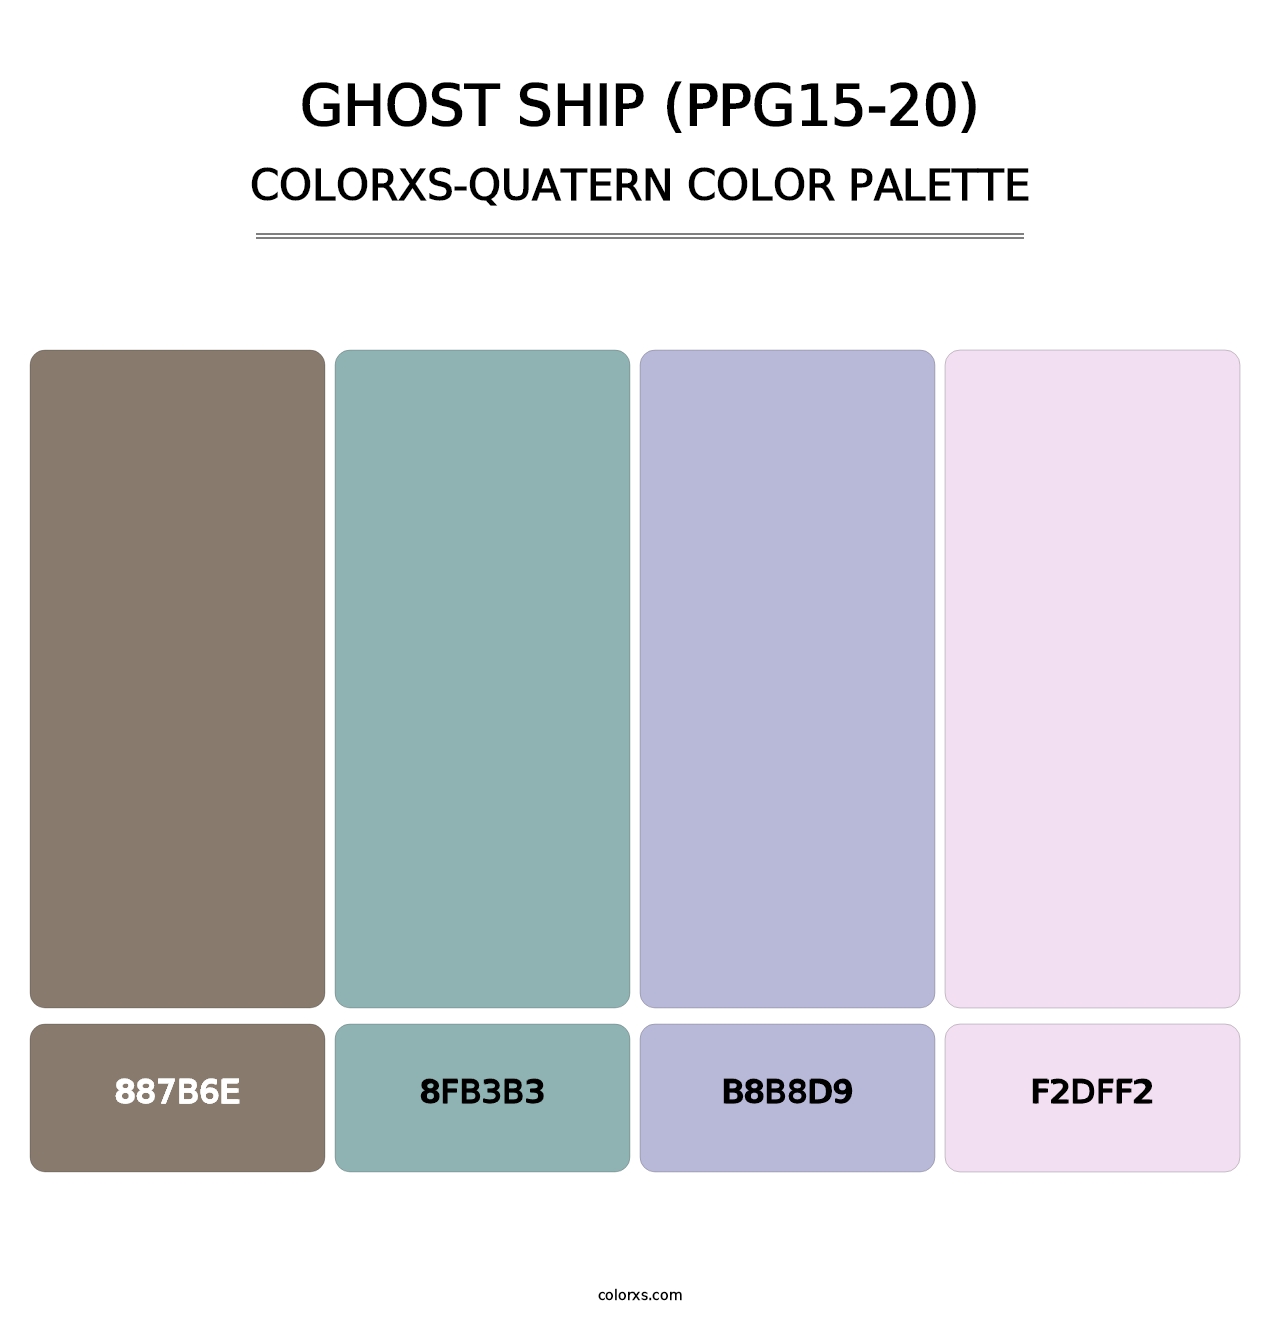 Ghost Ship (PPG15-20) - Colorxs Quatern Palette